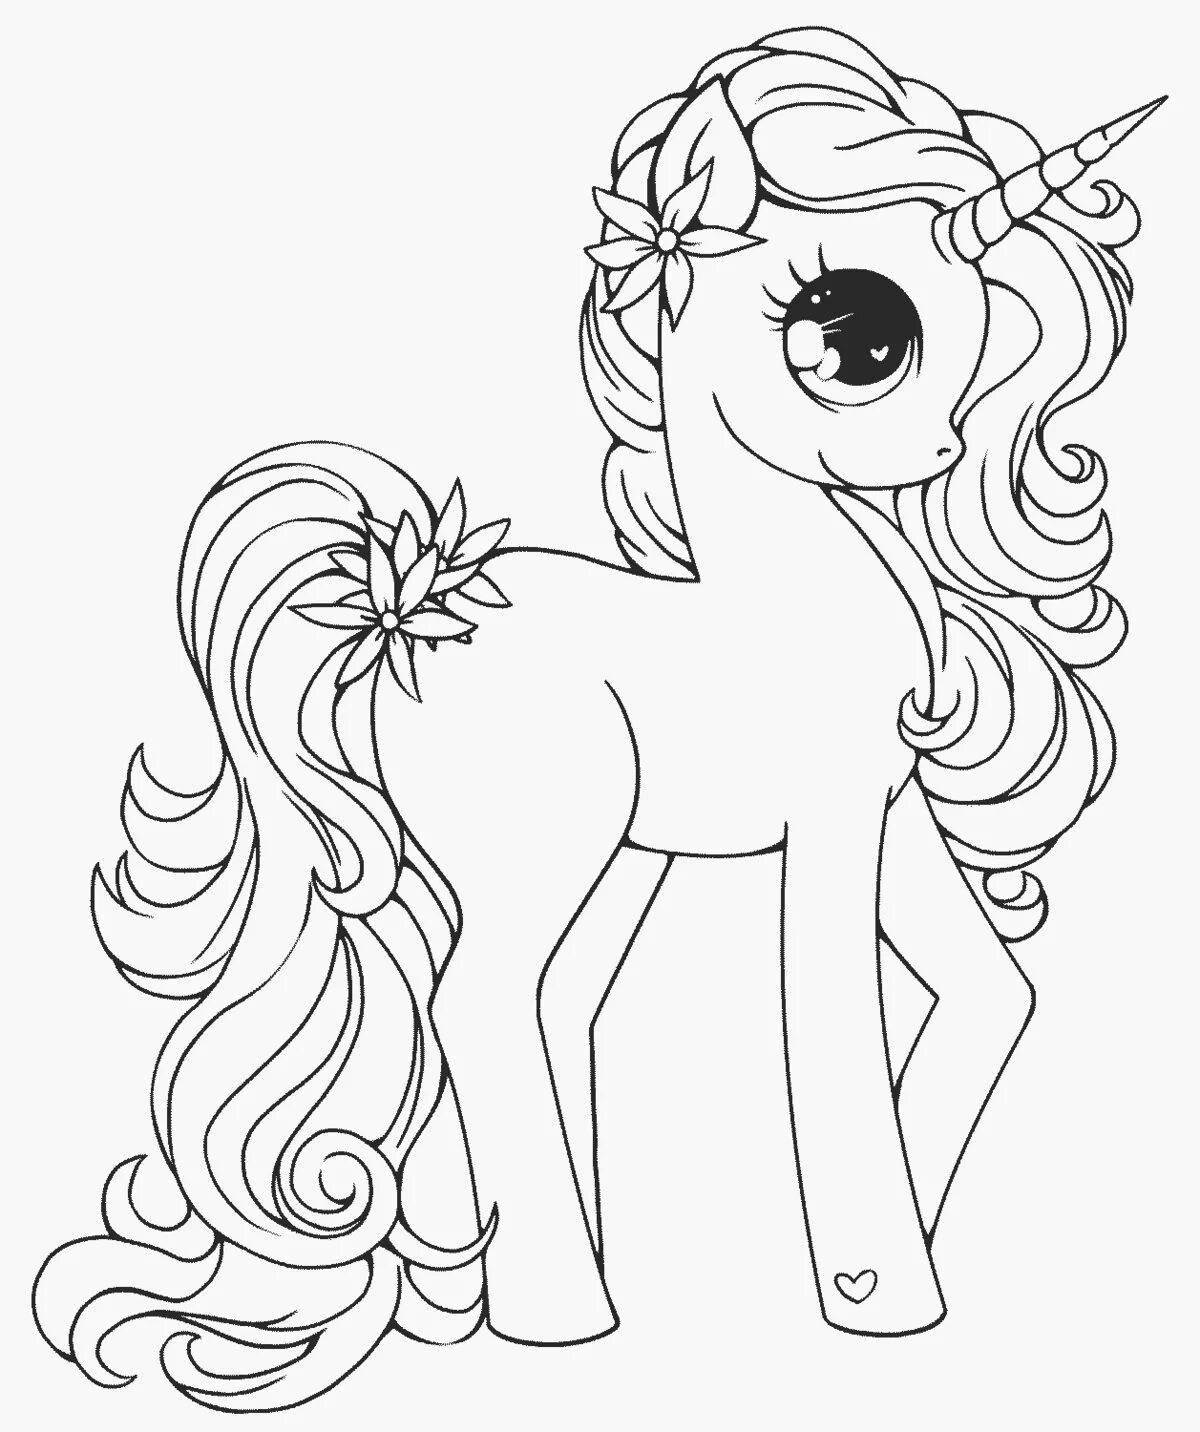 Luminous coloring pages for 5-6 year olds for girls unicorns